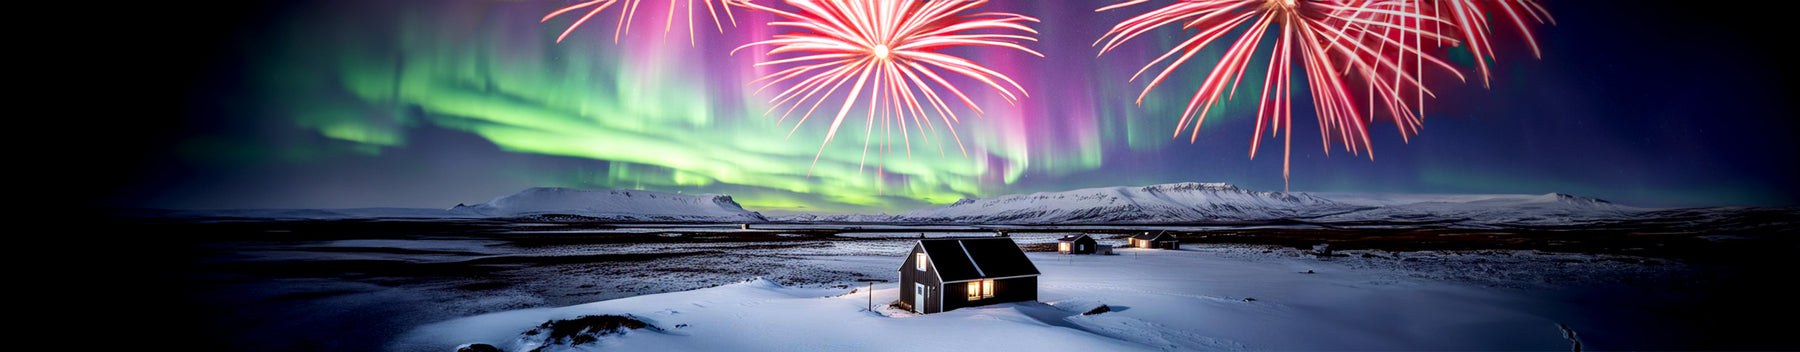 Top 6 Unusual Places to Spend New Year's Eve and Watch Spectacular Fireworks Displays